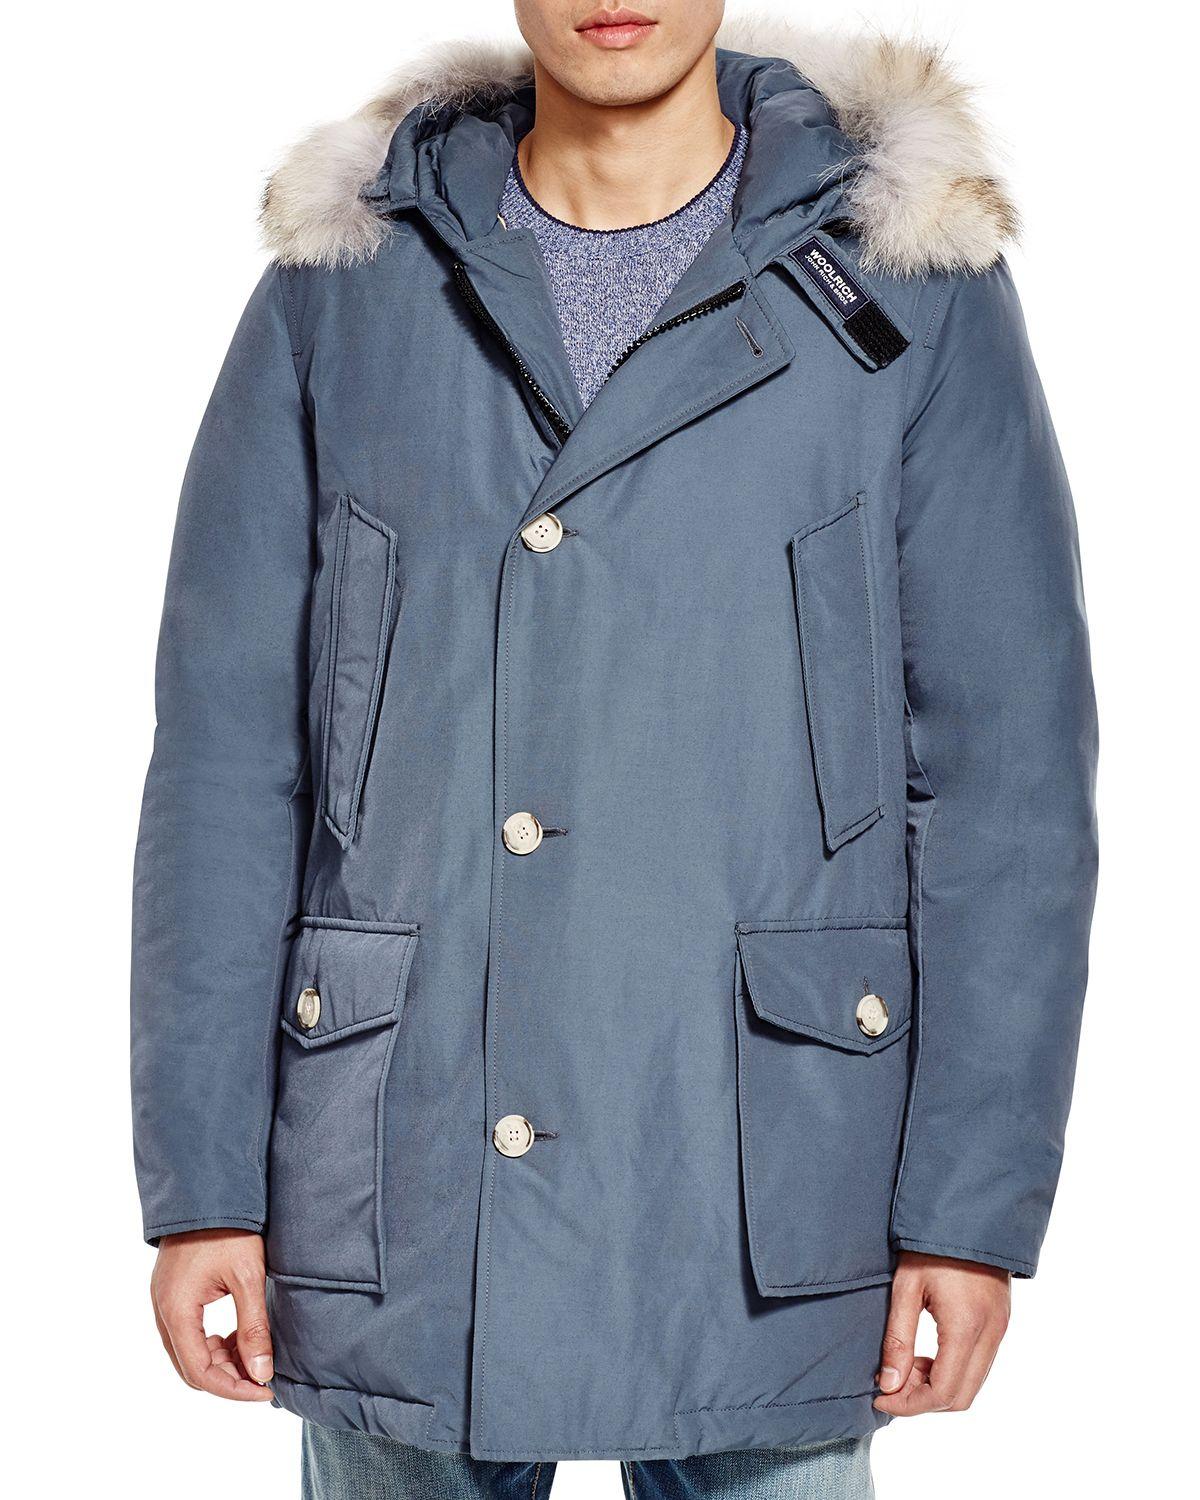 Woolrich Cotton Arctic Down Parka in Blue/Grey (Blue) for Men - Lyst